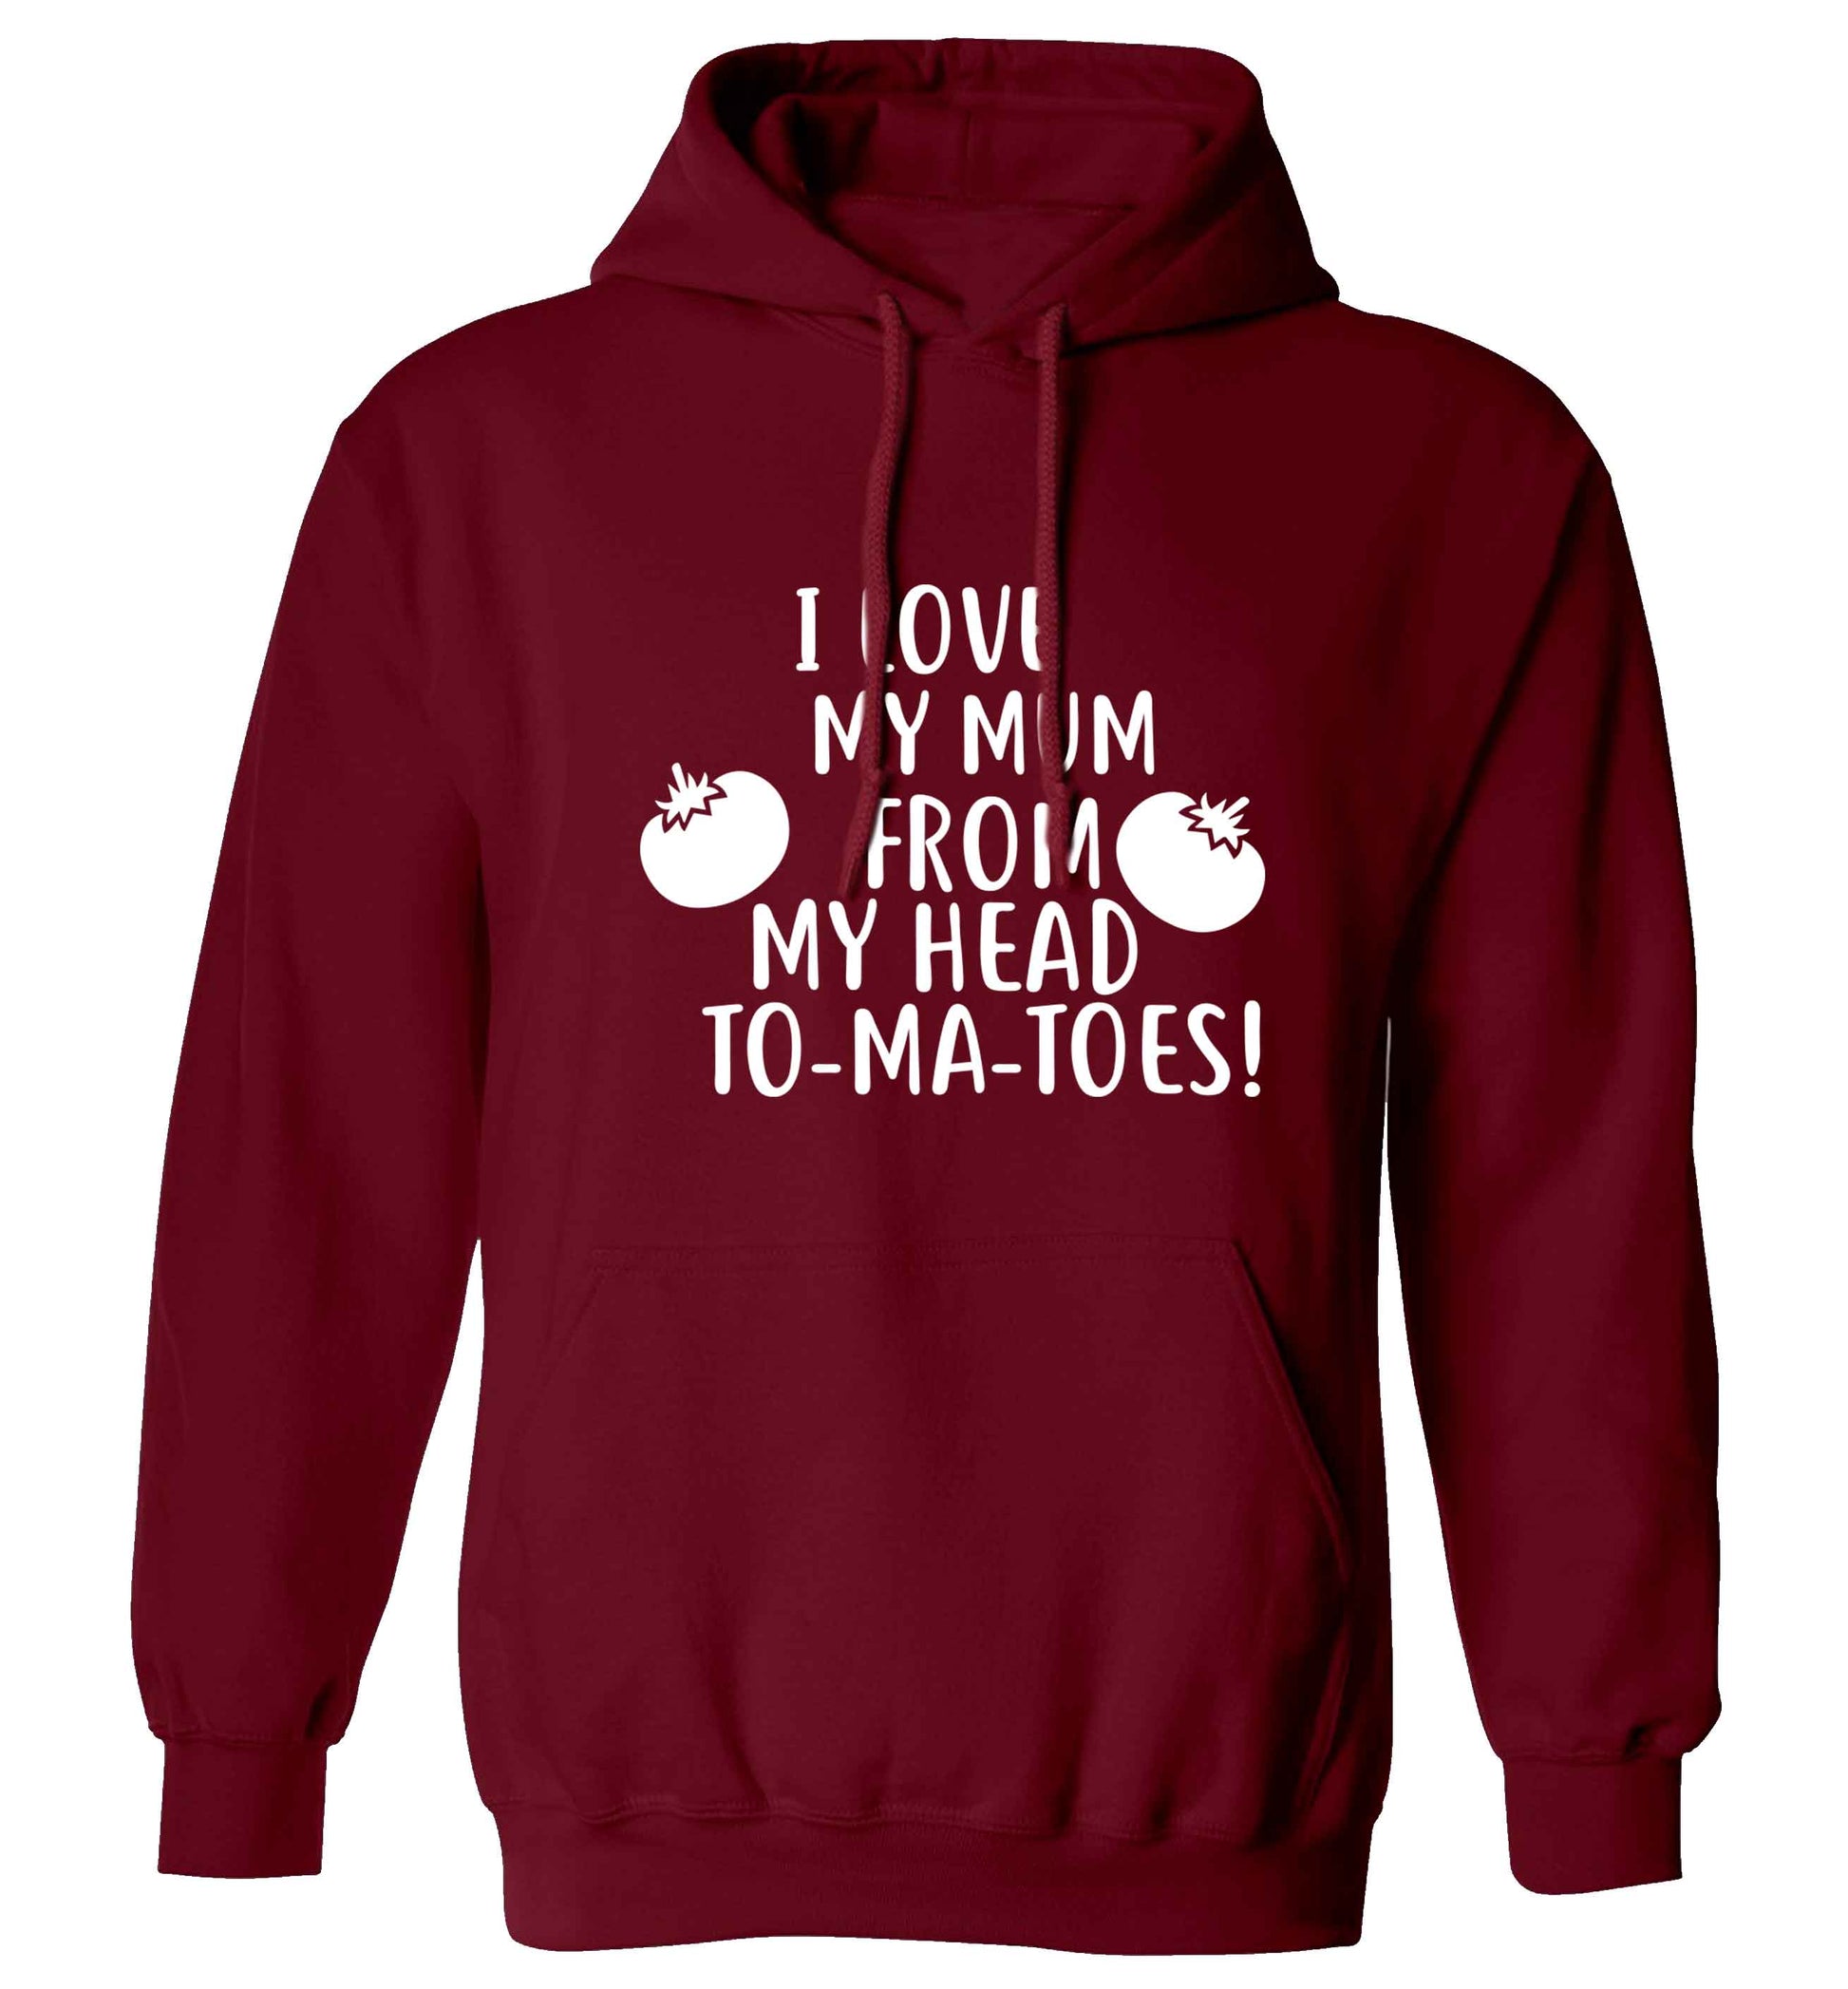 I love my mum from my head to-my-toes! adults unisex maroon hoodie 2XL